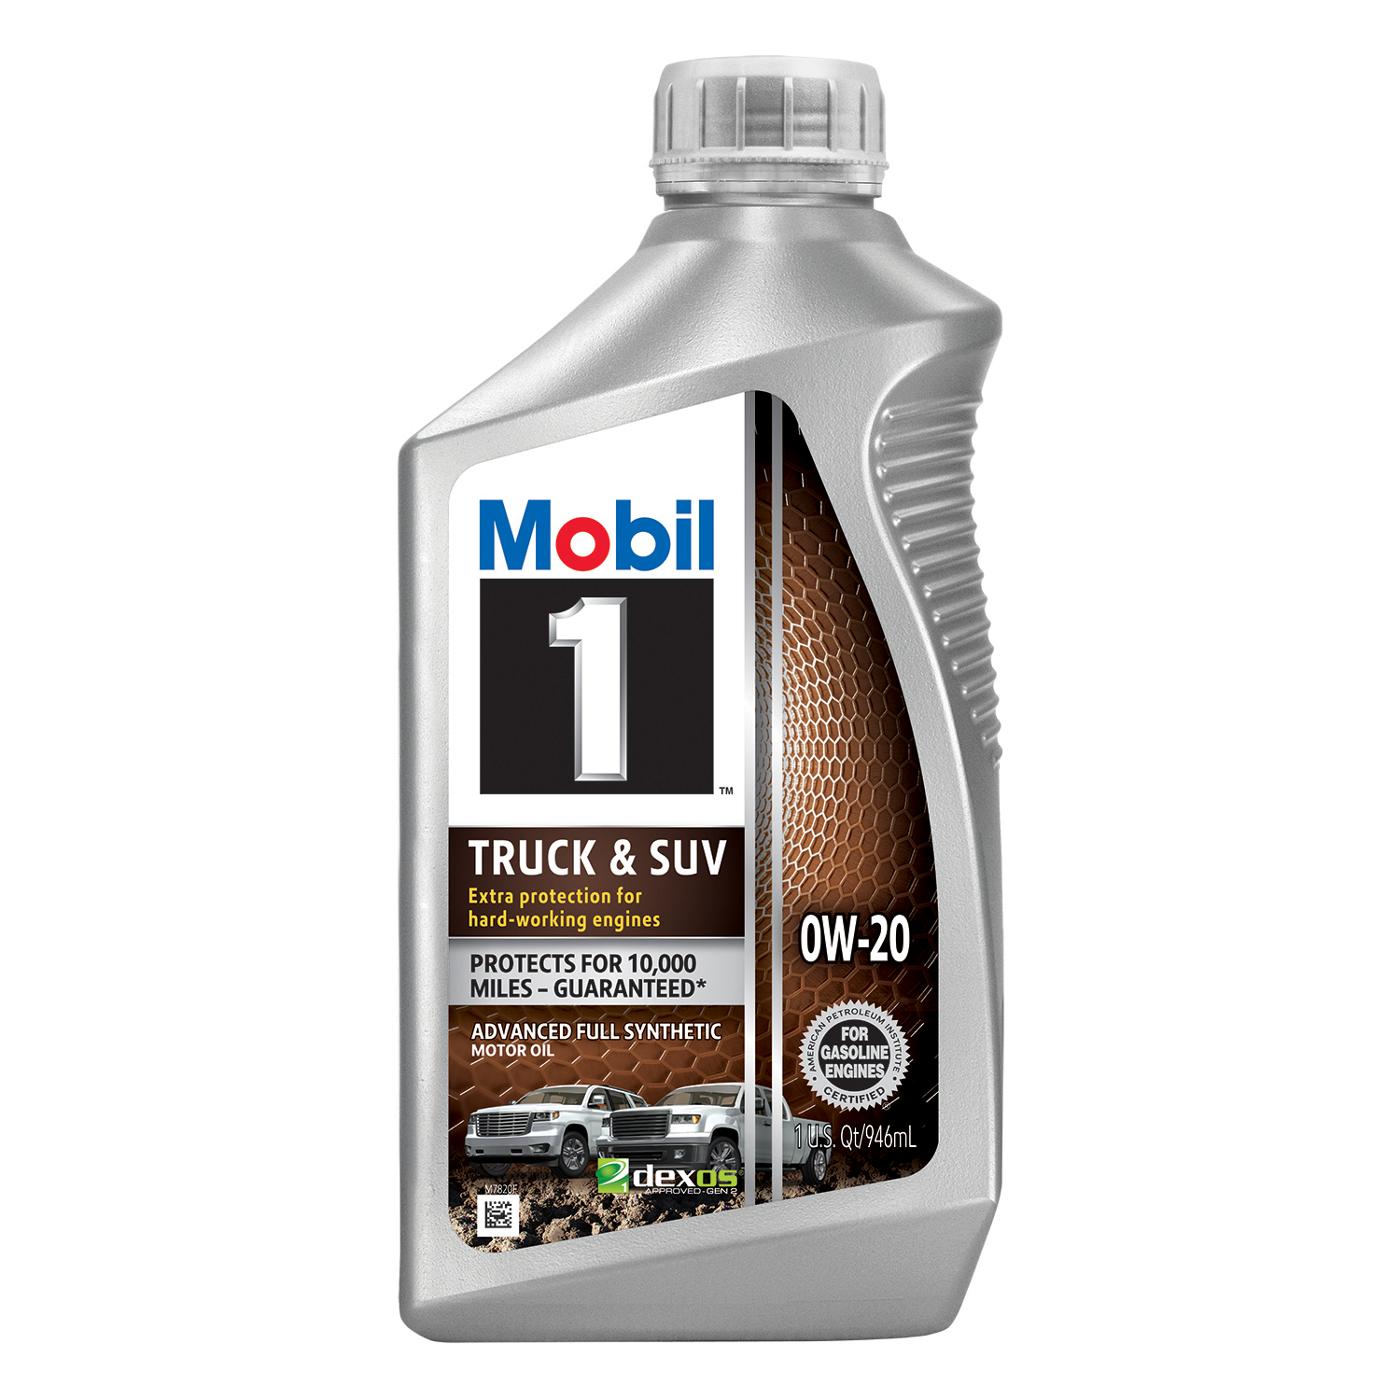 Mobil 1 0W-20 Full Synthetic Truck & SUV Motor Oil; image 1 of 2